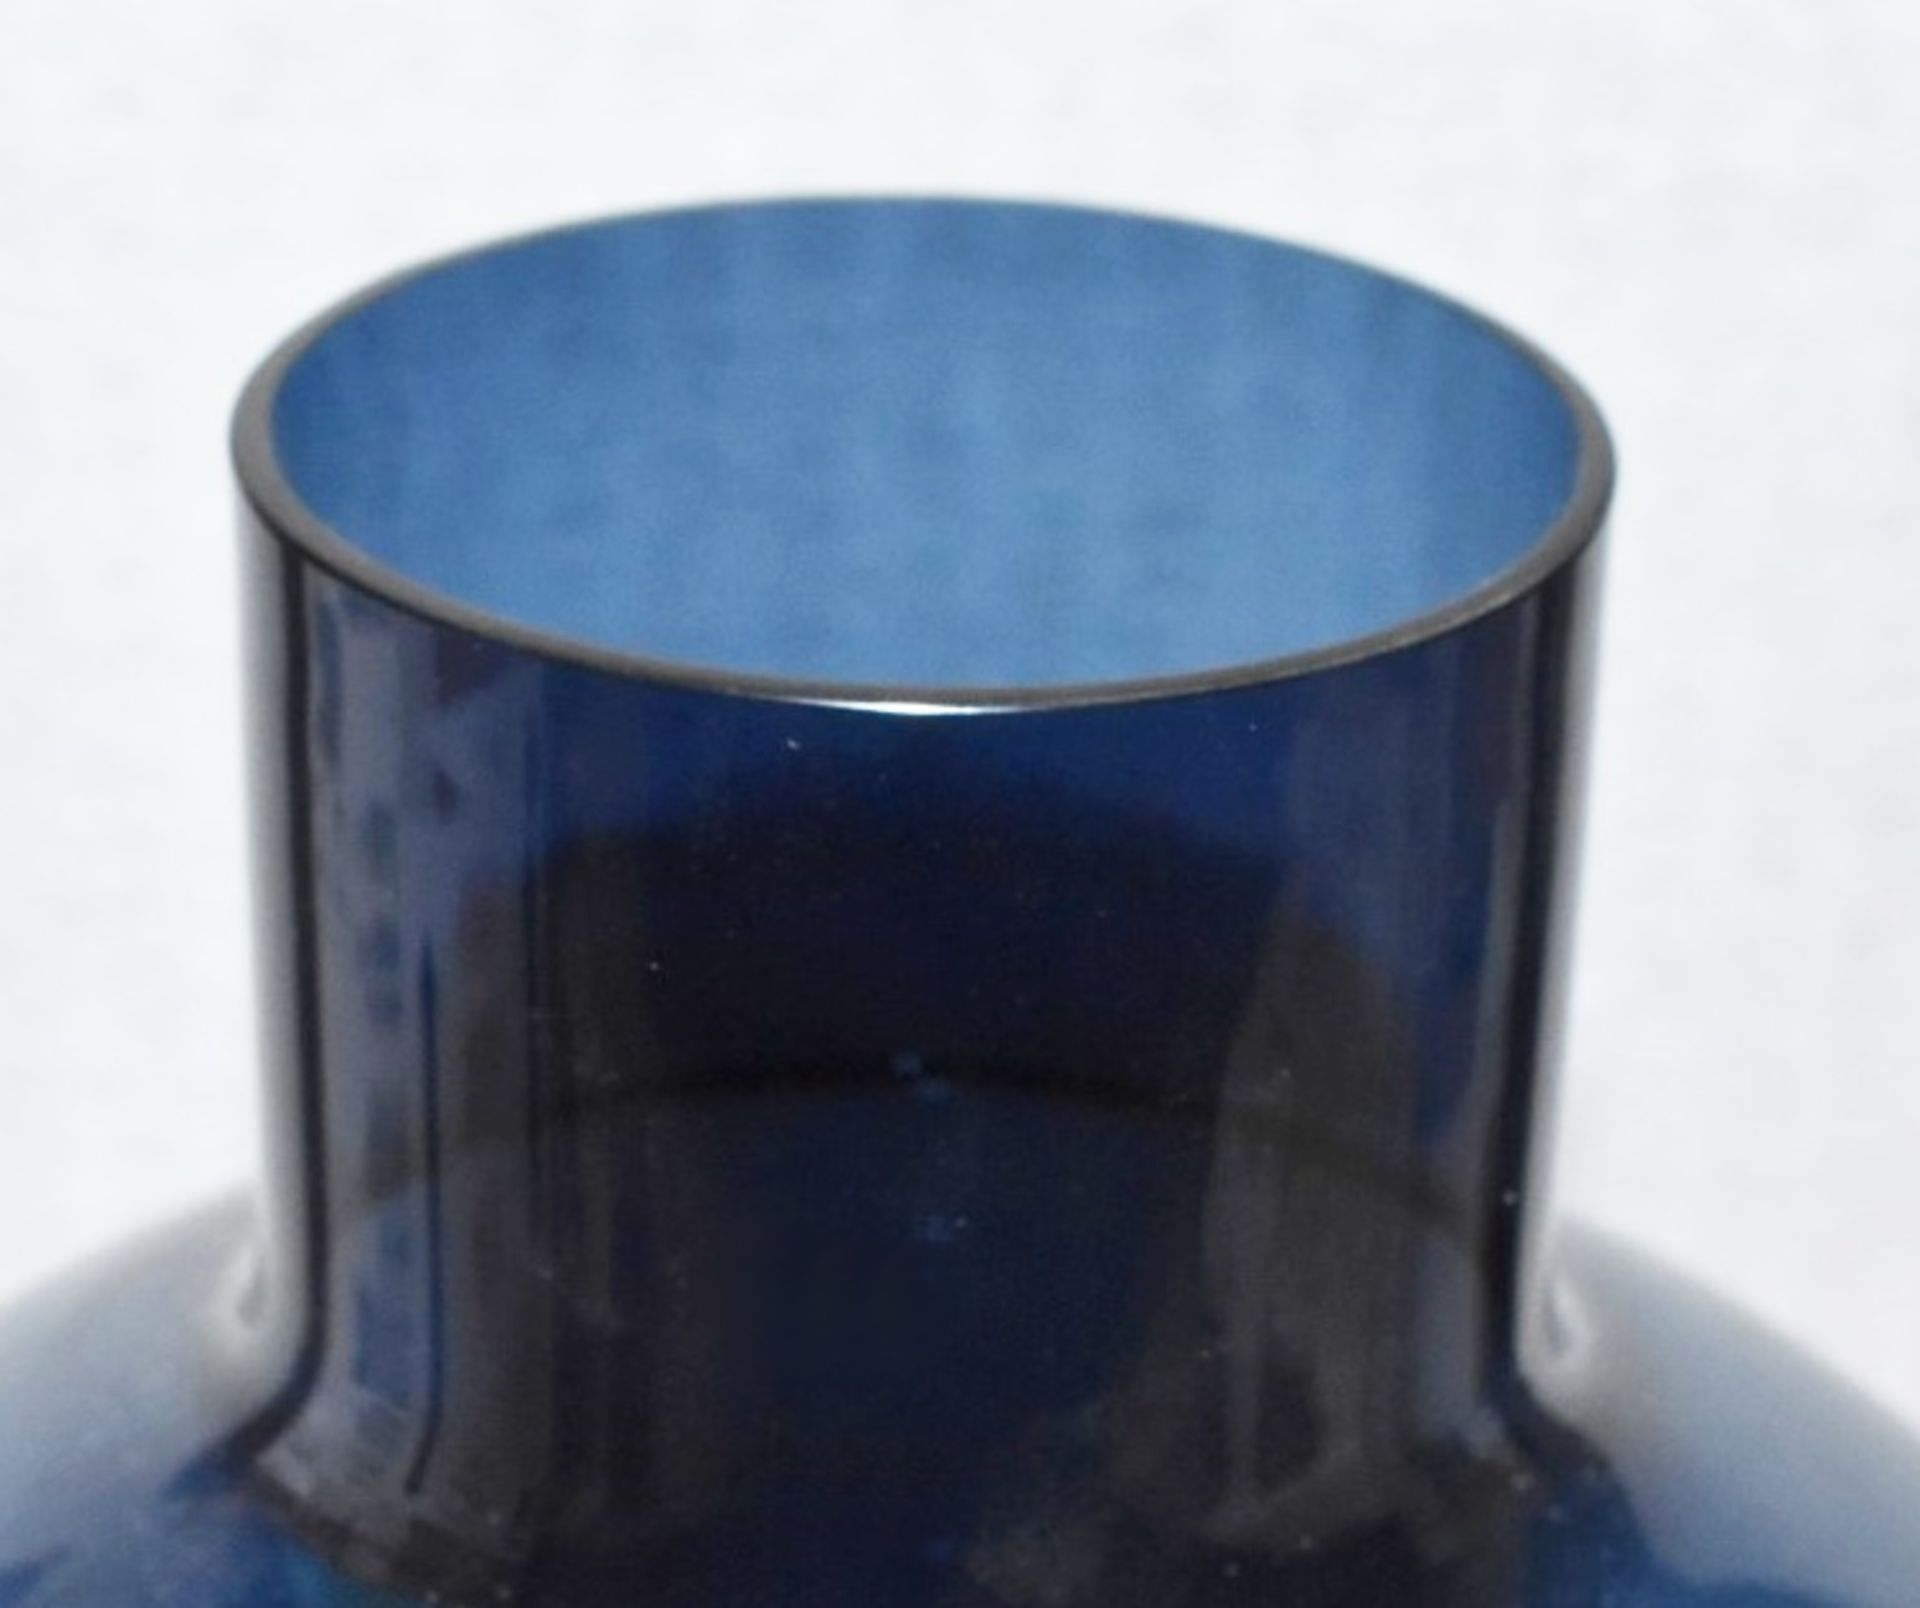 1 x POLTRONA FRAU 'Pallo Pot' High Quality Blown Glass Vase in Midnight Blue - RRP £1,080 *Signed* - Image 7 of 7